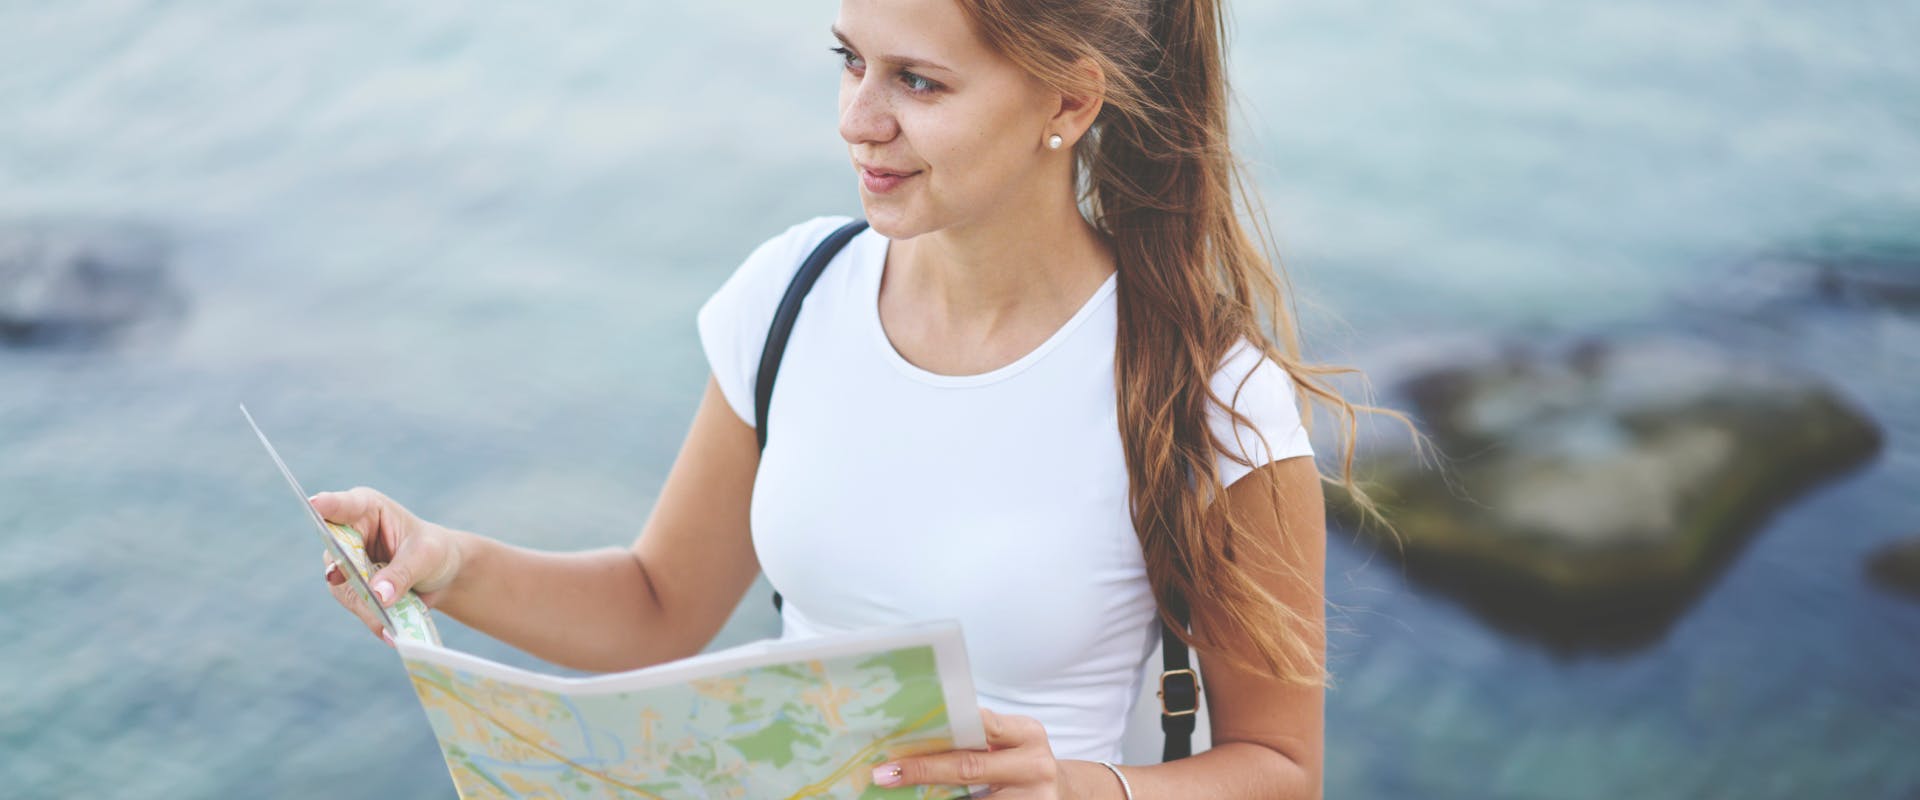 a solo female traveler next to a calm body of water looking up from a paper map